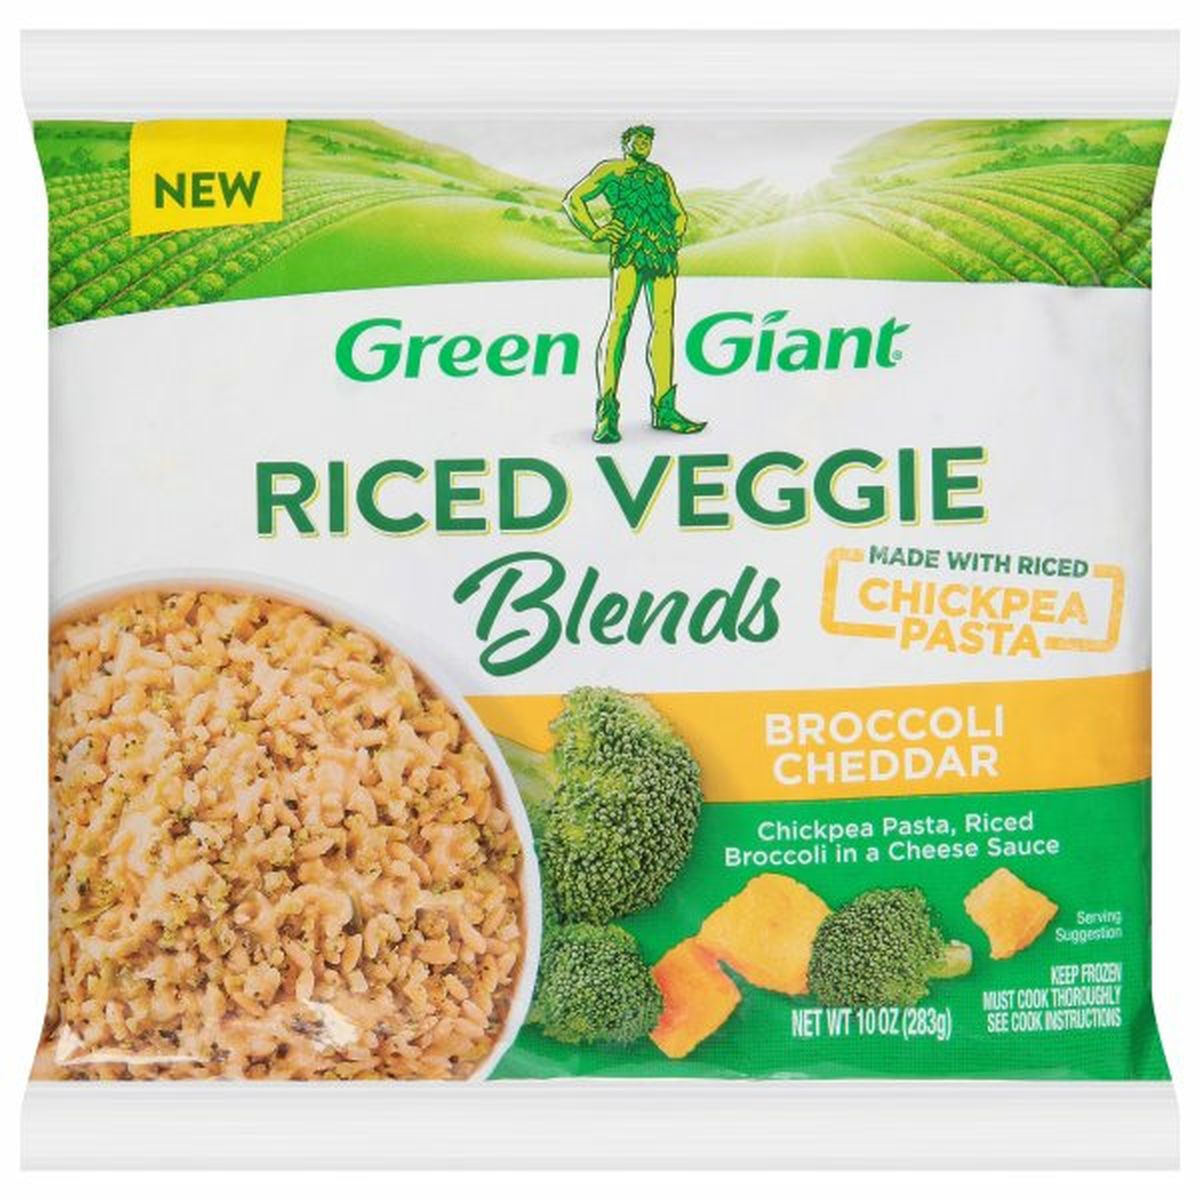 Calories in Green Giant Riced Veggie Blends, Broccoli Cheddar